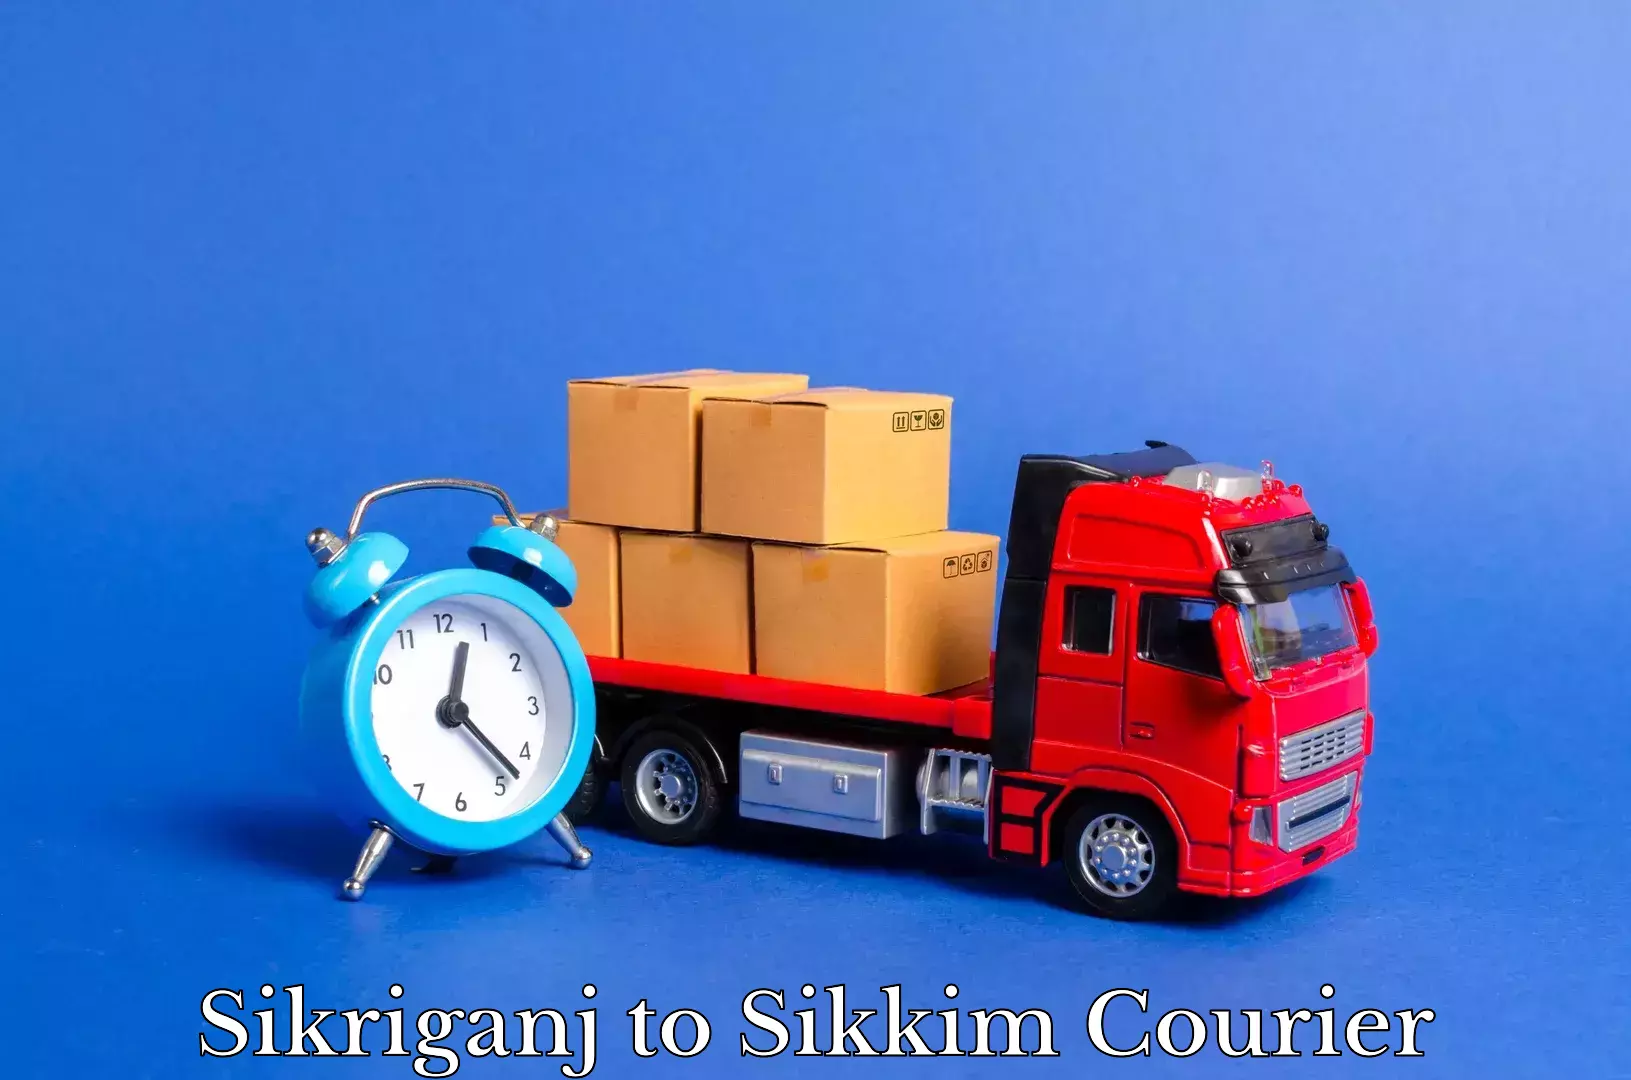 Professional furniture movers Sikriganj to Geyzing